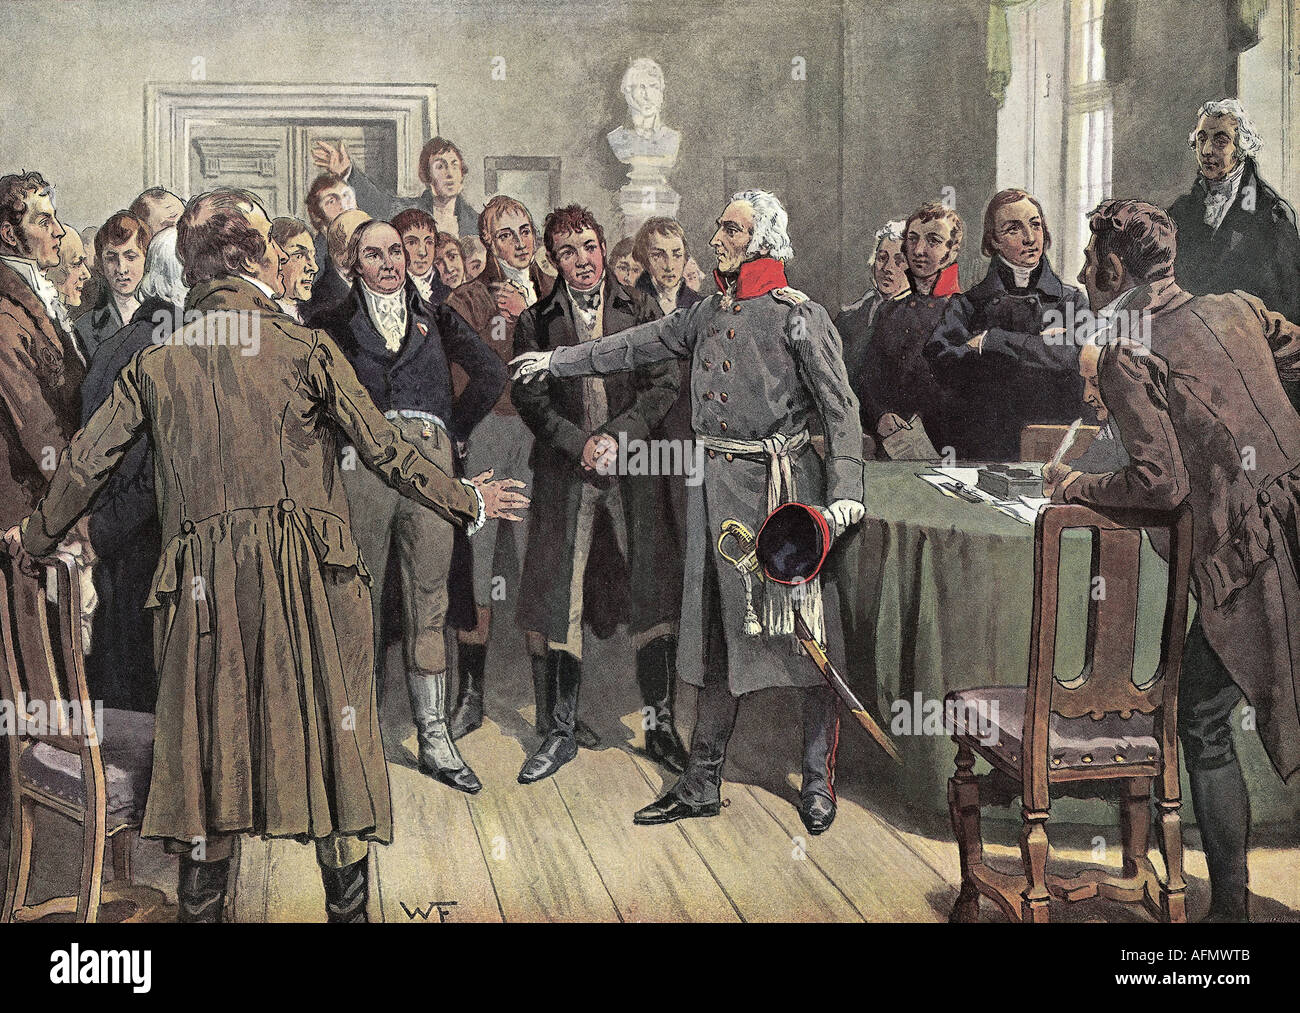 Yorck von Wartenburg, Ludwig Graf, 26.9.1759 - 4.10.1830, Prussian general, von Wartenburg, speech to east Prussian People in Koenigsberg, 5.2.1813, historical picture, art print, from Waldemar Friedrich (1846 - 1910), engraving, after painting from Brausewetter, 19th century, Stock Photo